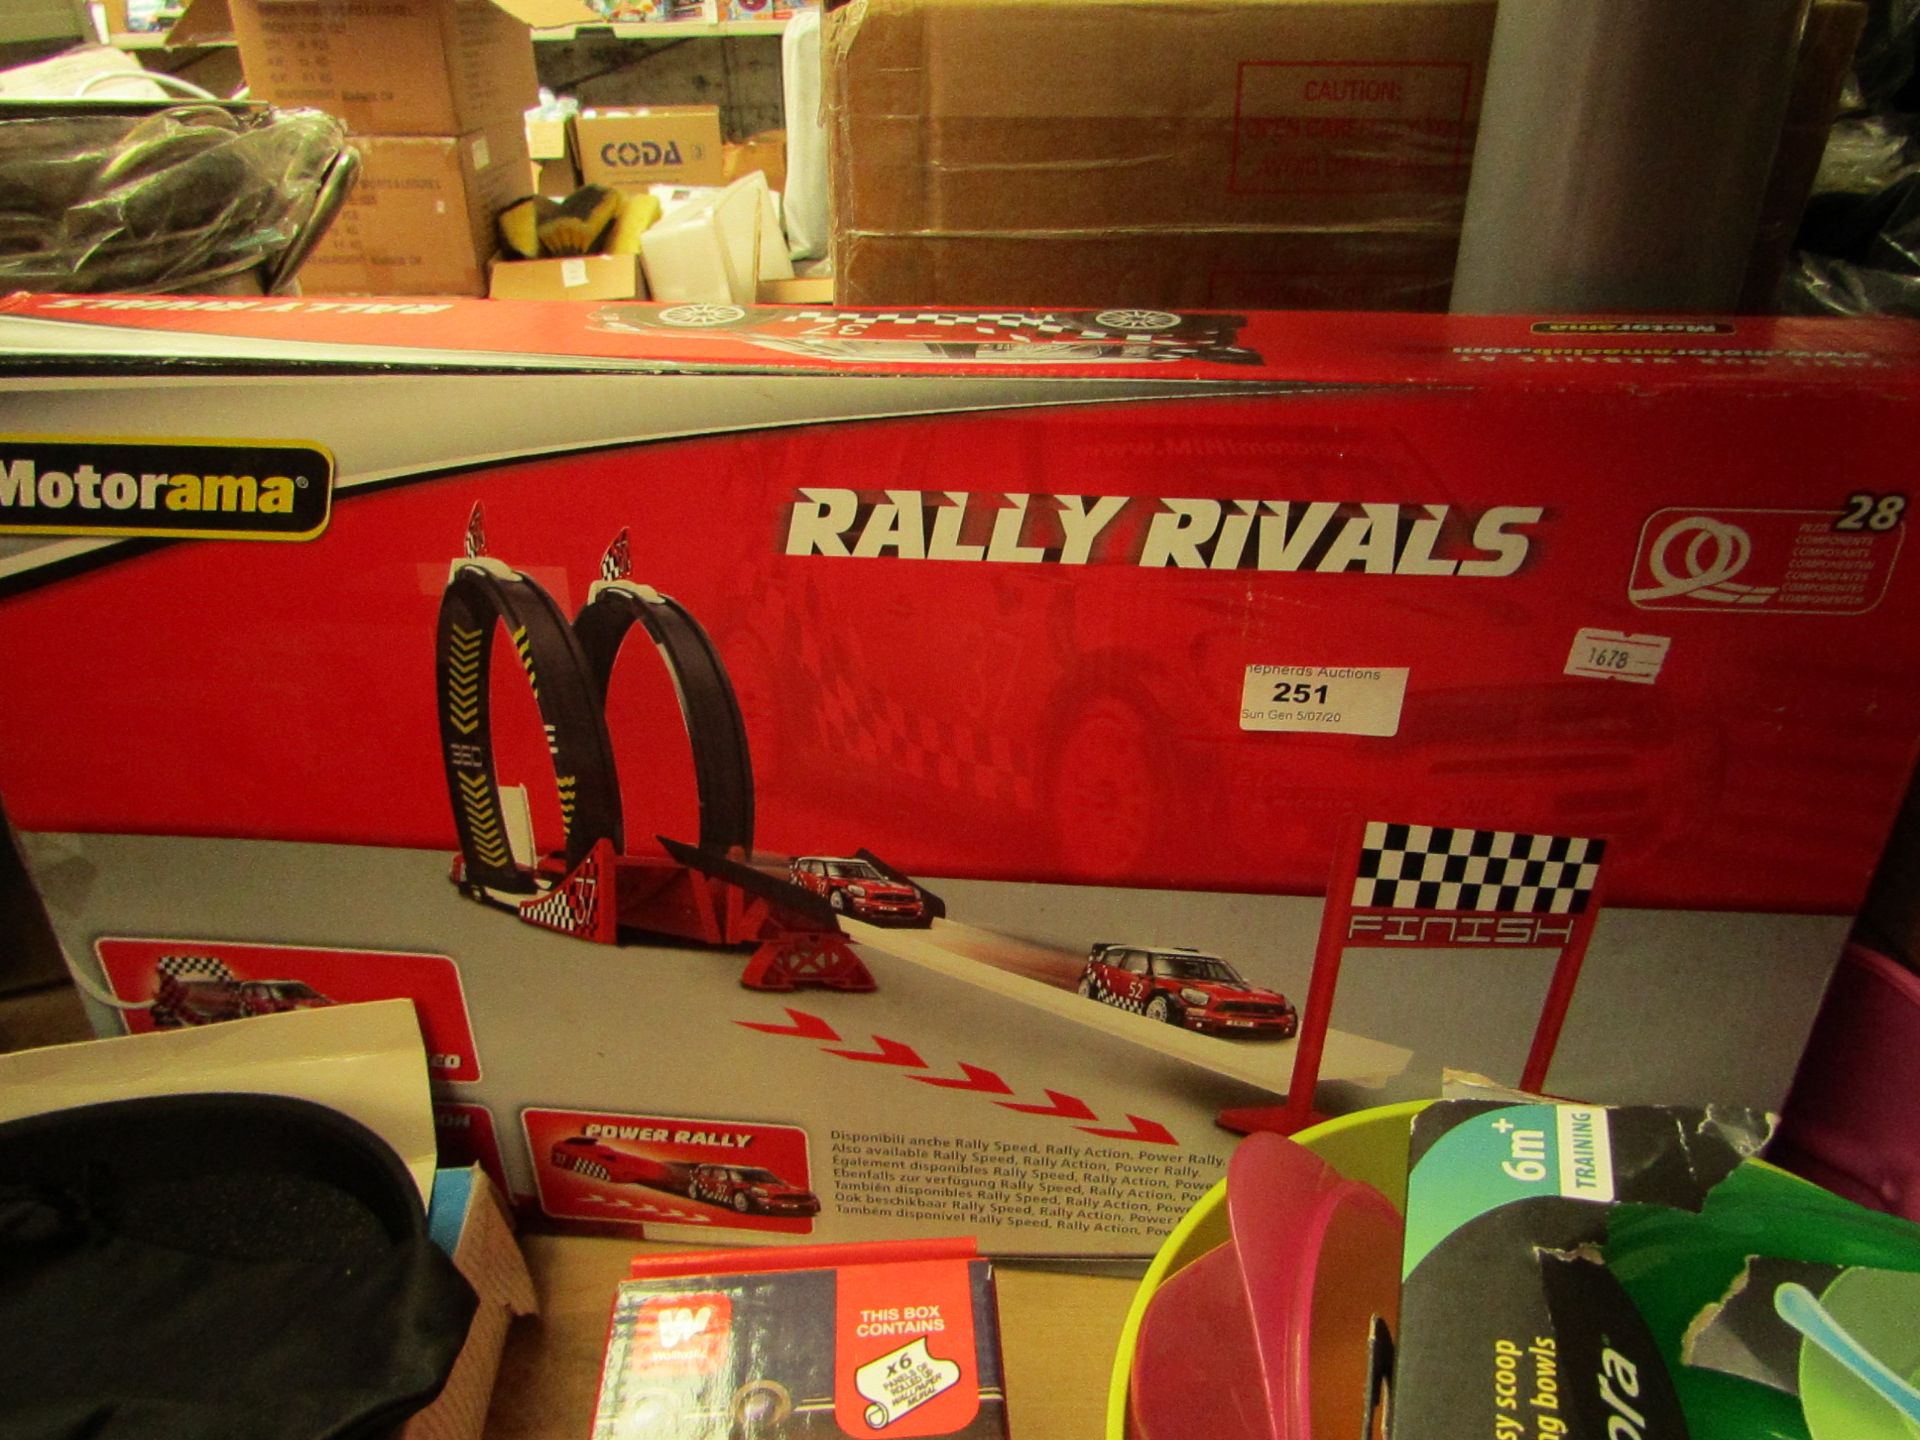 Motorama Rally Rivals packaged